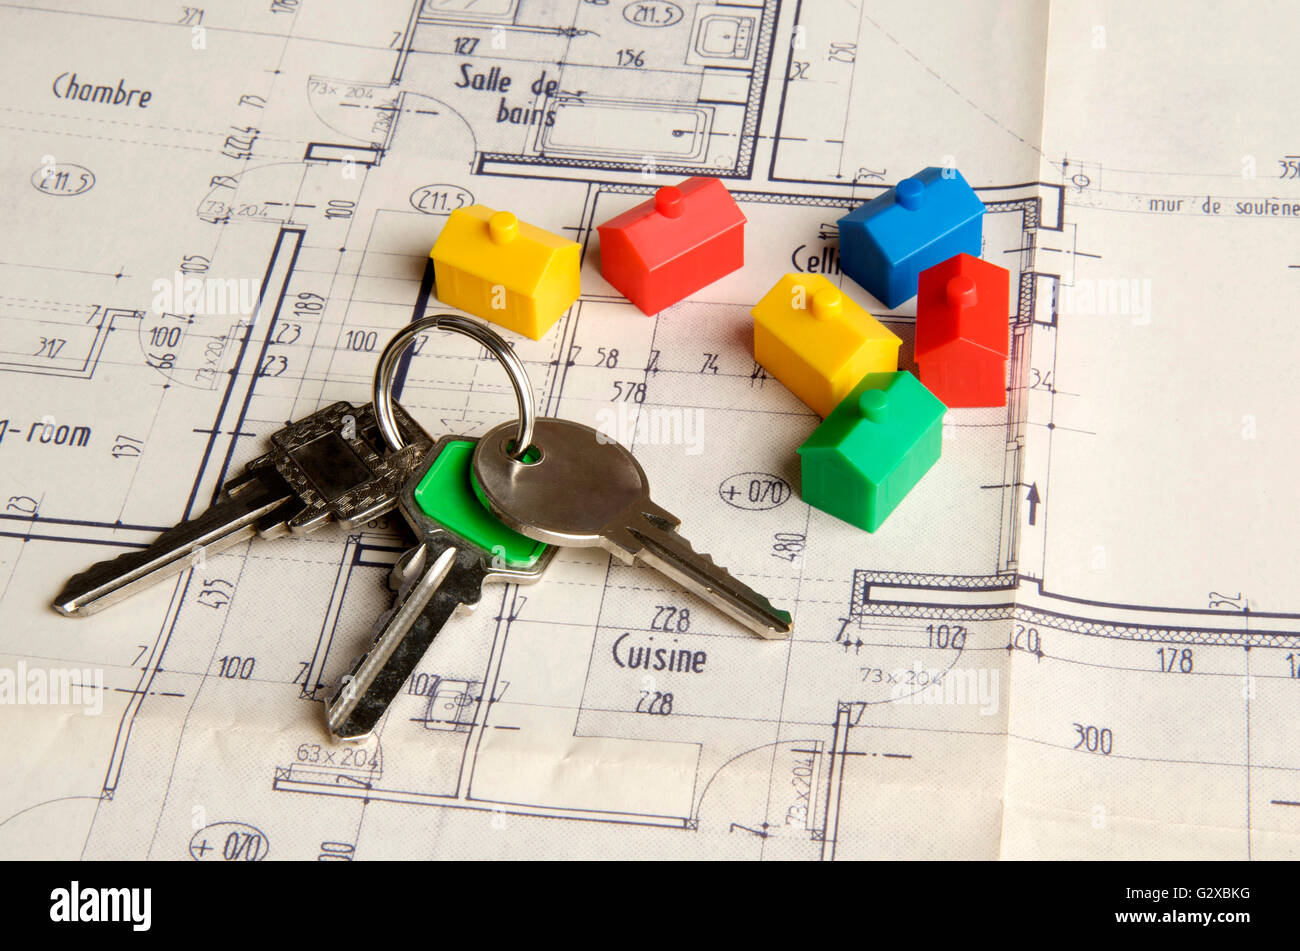 House keys and miniature houses on a construction plan, symbolic image for real estate market, France Stock Photo